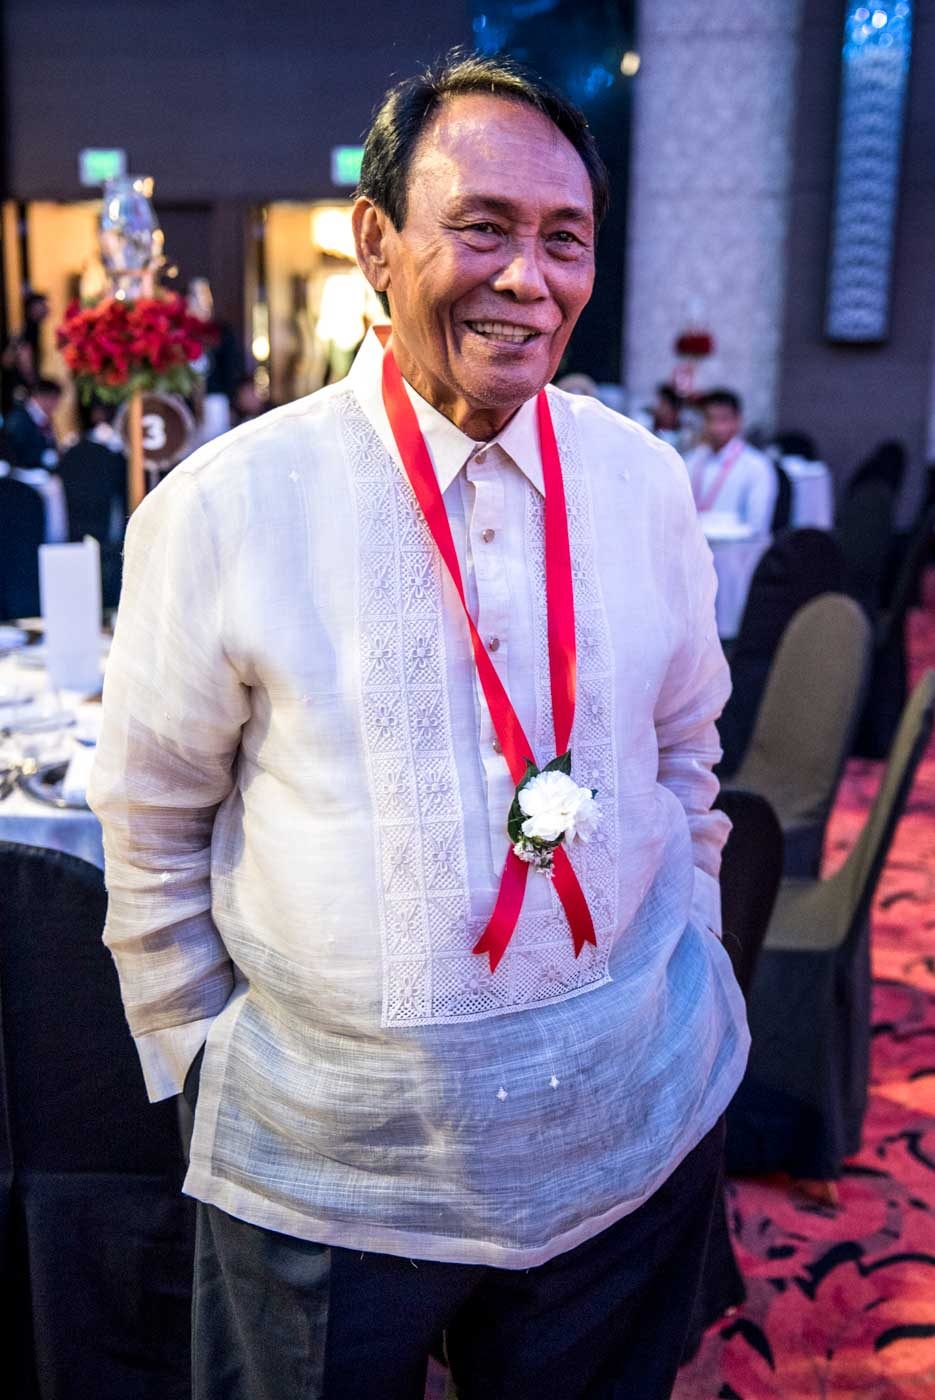 Boxing legend Rene Barrientos, who defeated Ruben Navarro in 1968 to win the WBC junior lightweight championship. Photo by Arvee Eco/Rappler 